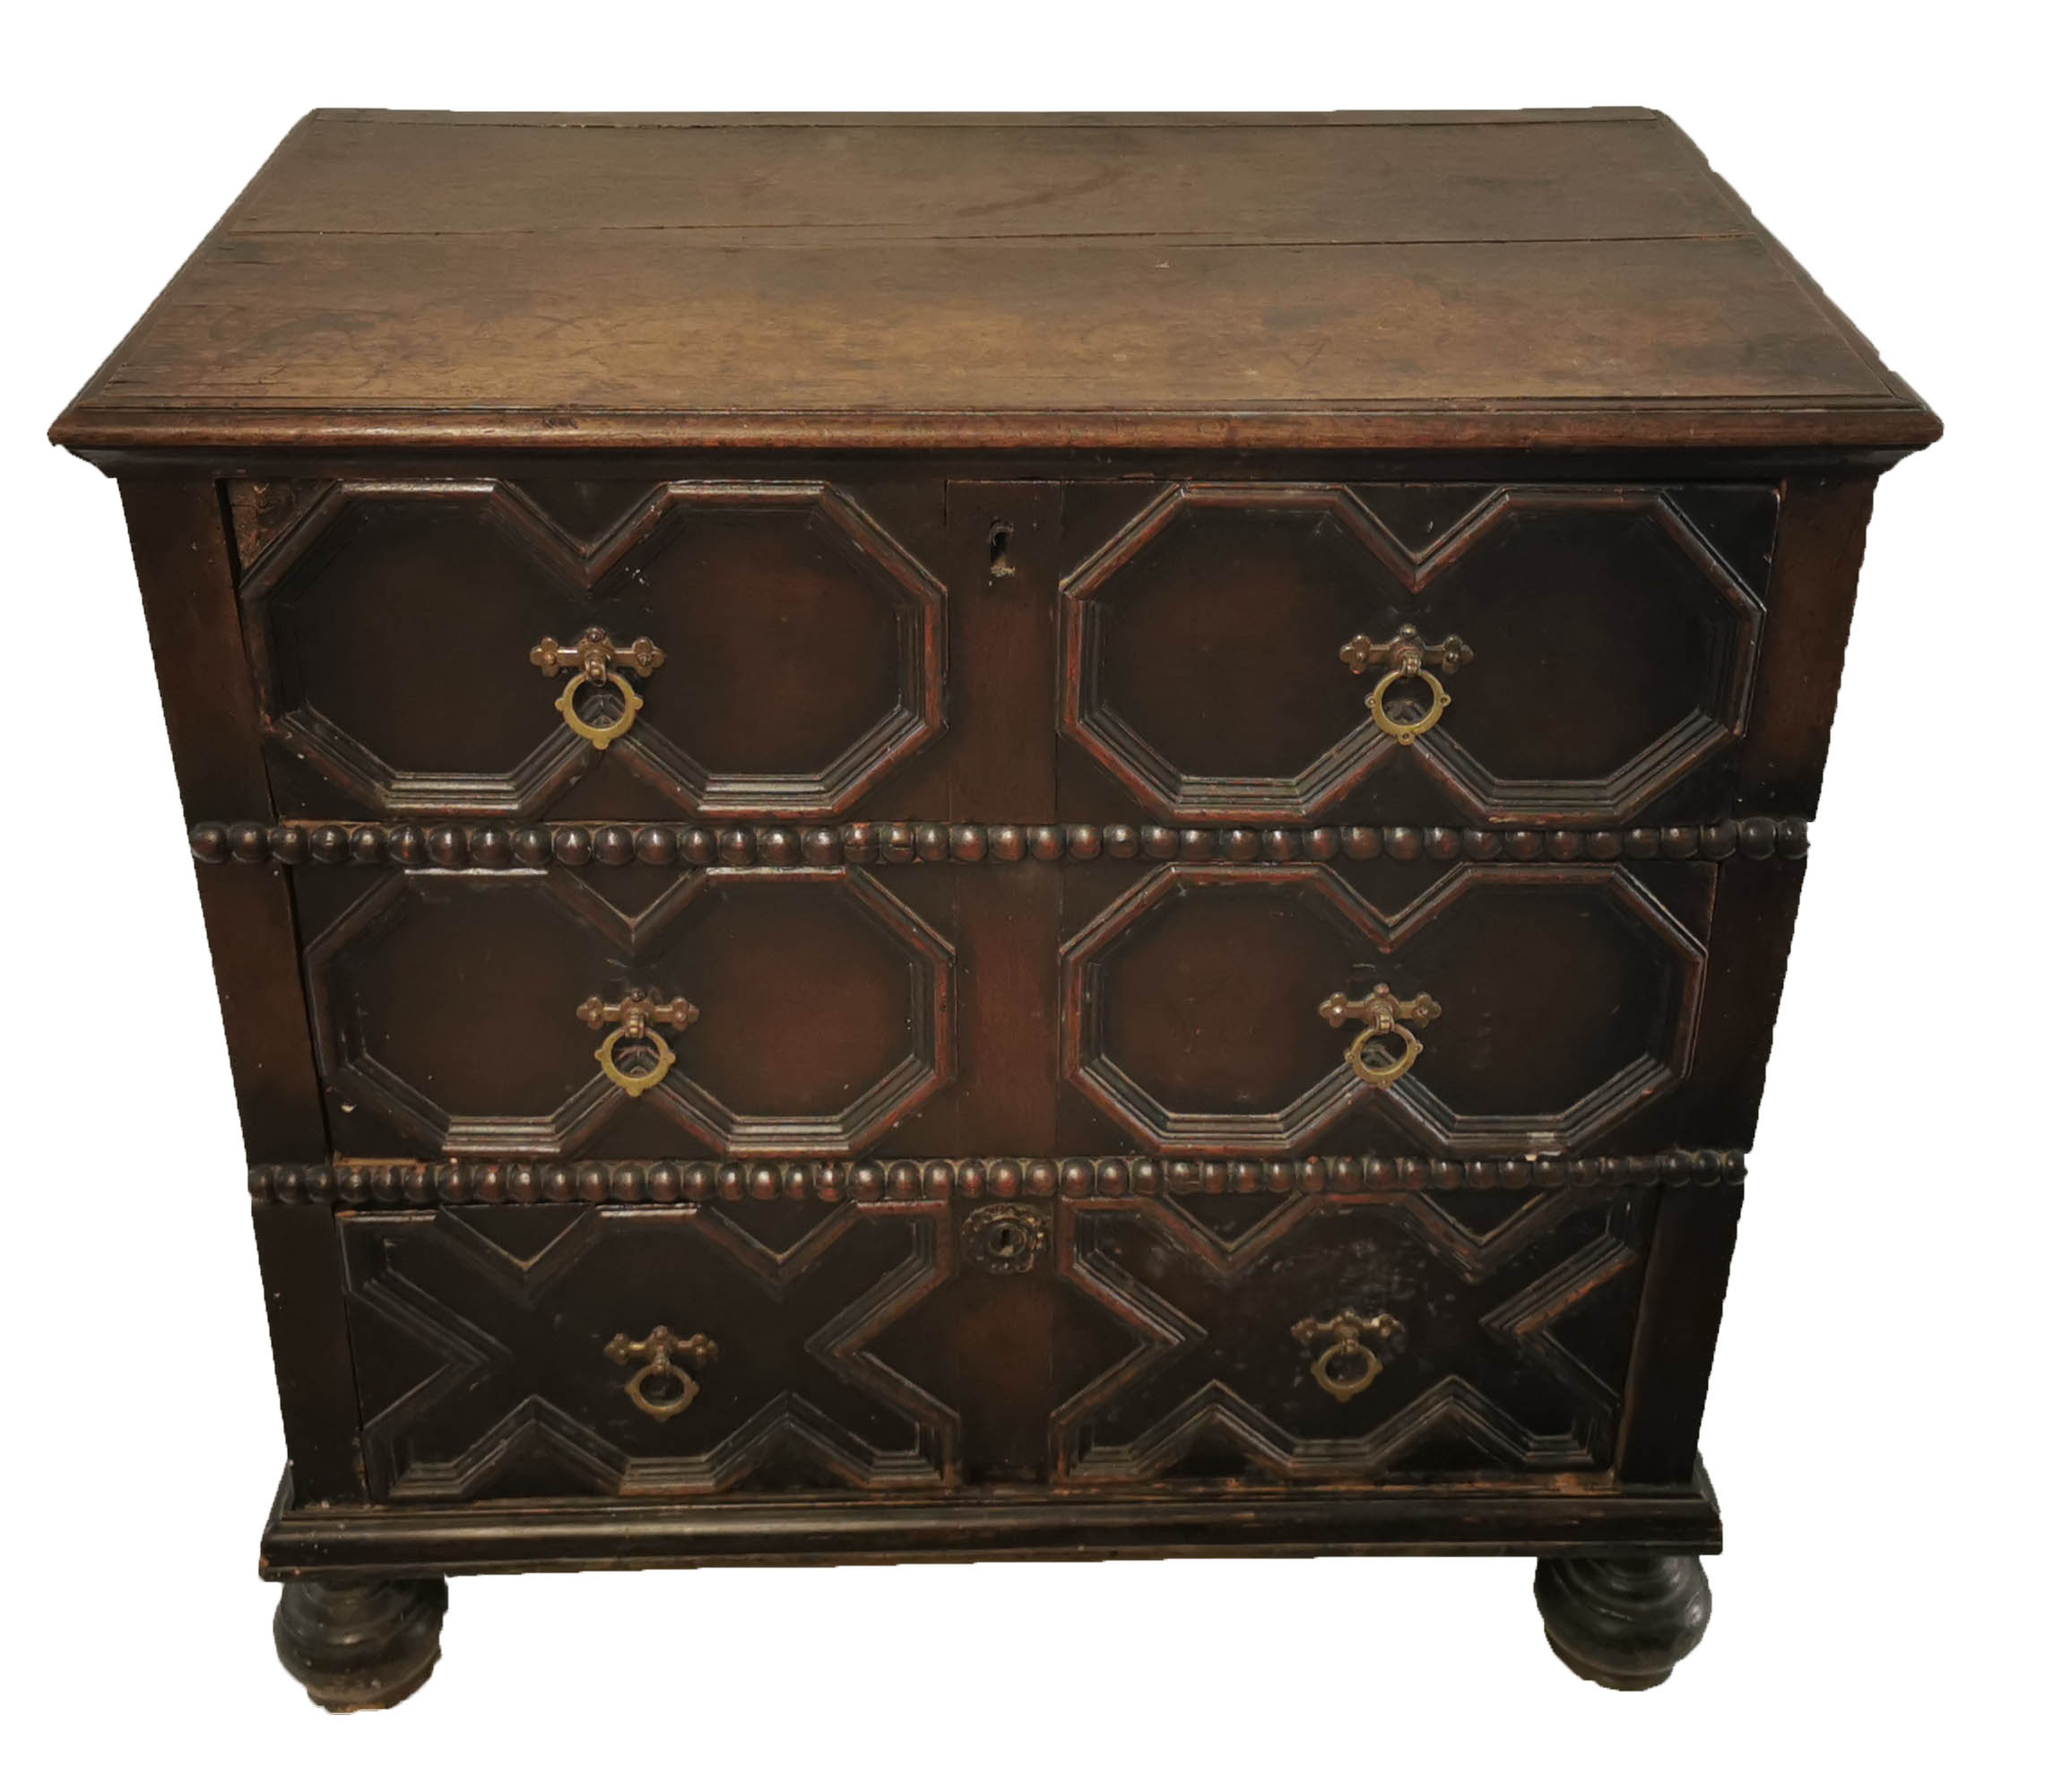 A WILLIAM AND MARY PERIOD OAK CHEST Of three drawers, on bun feet. (89cm x 53cm x 85cm) - Image 2 of 3